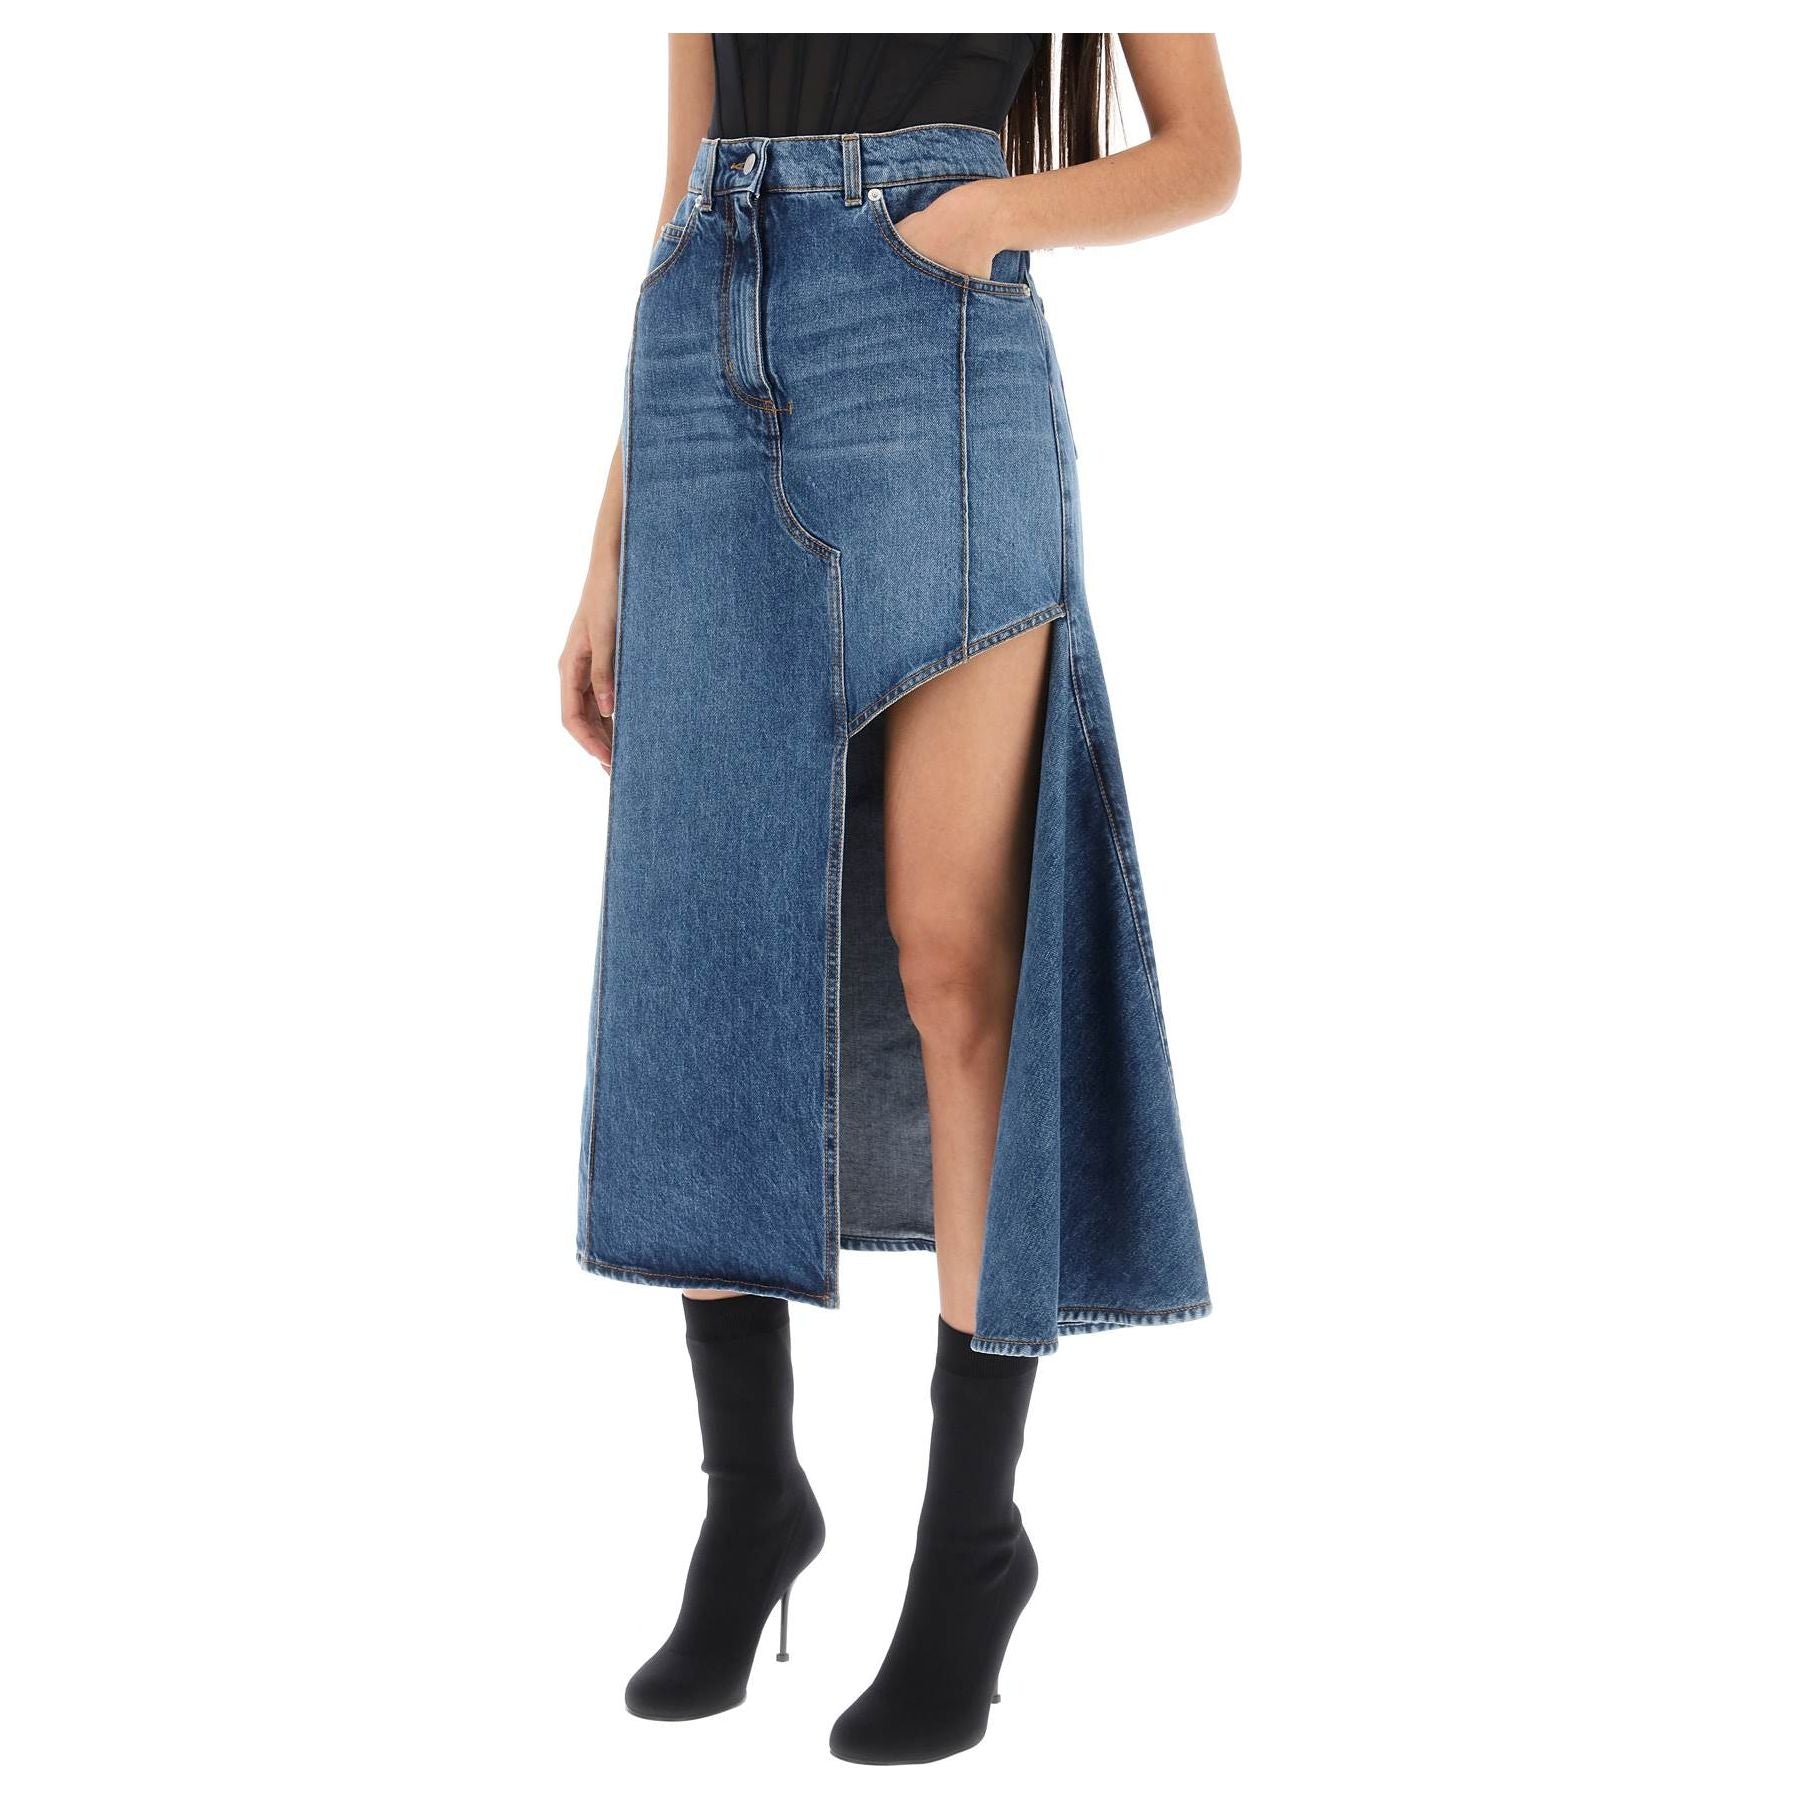 Stone-Washed Denim Skirt with Cut Out